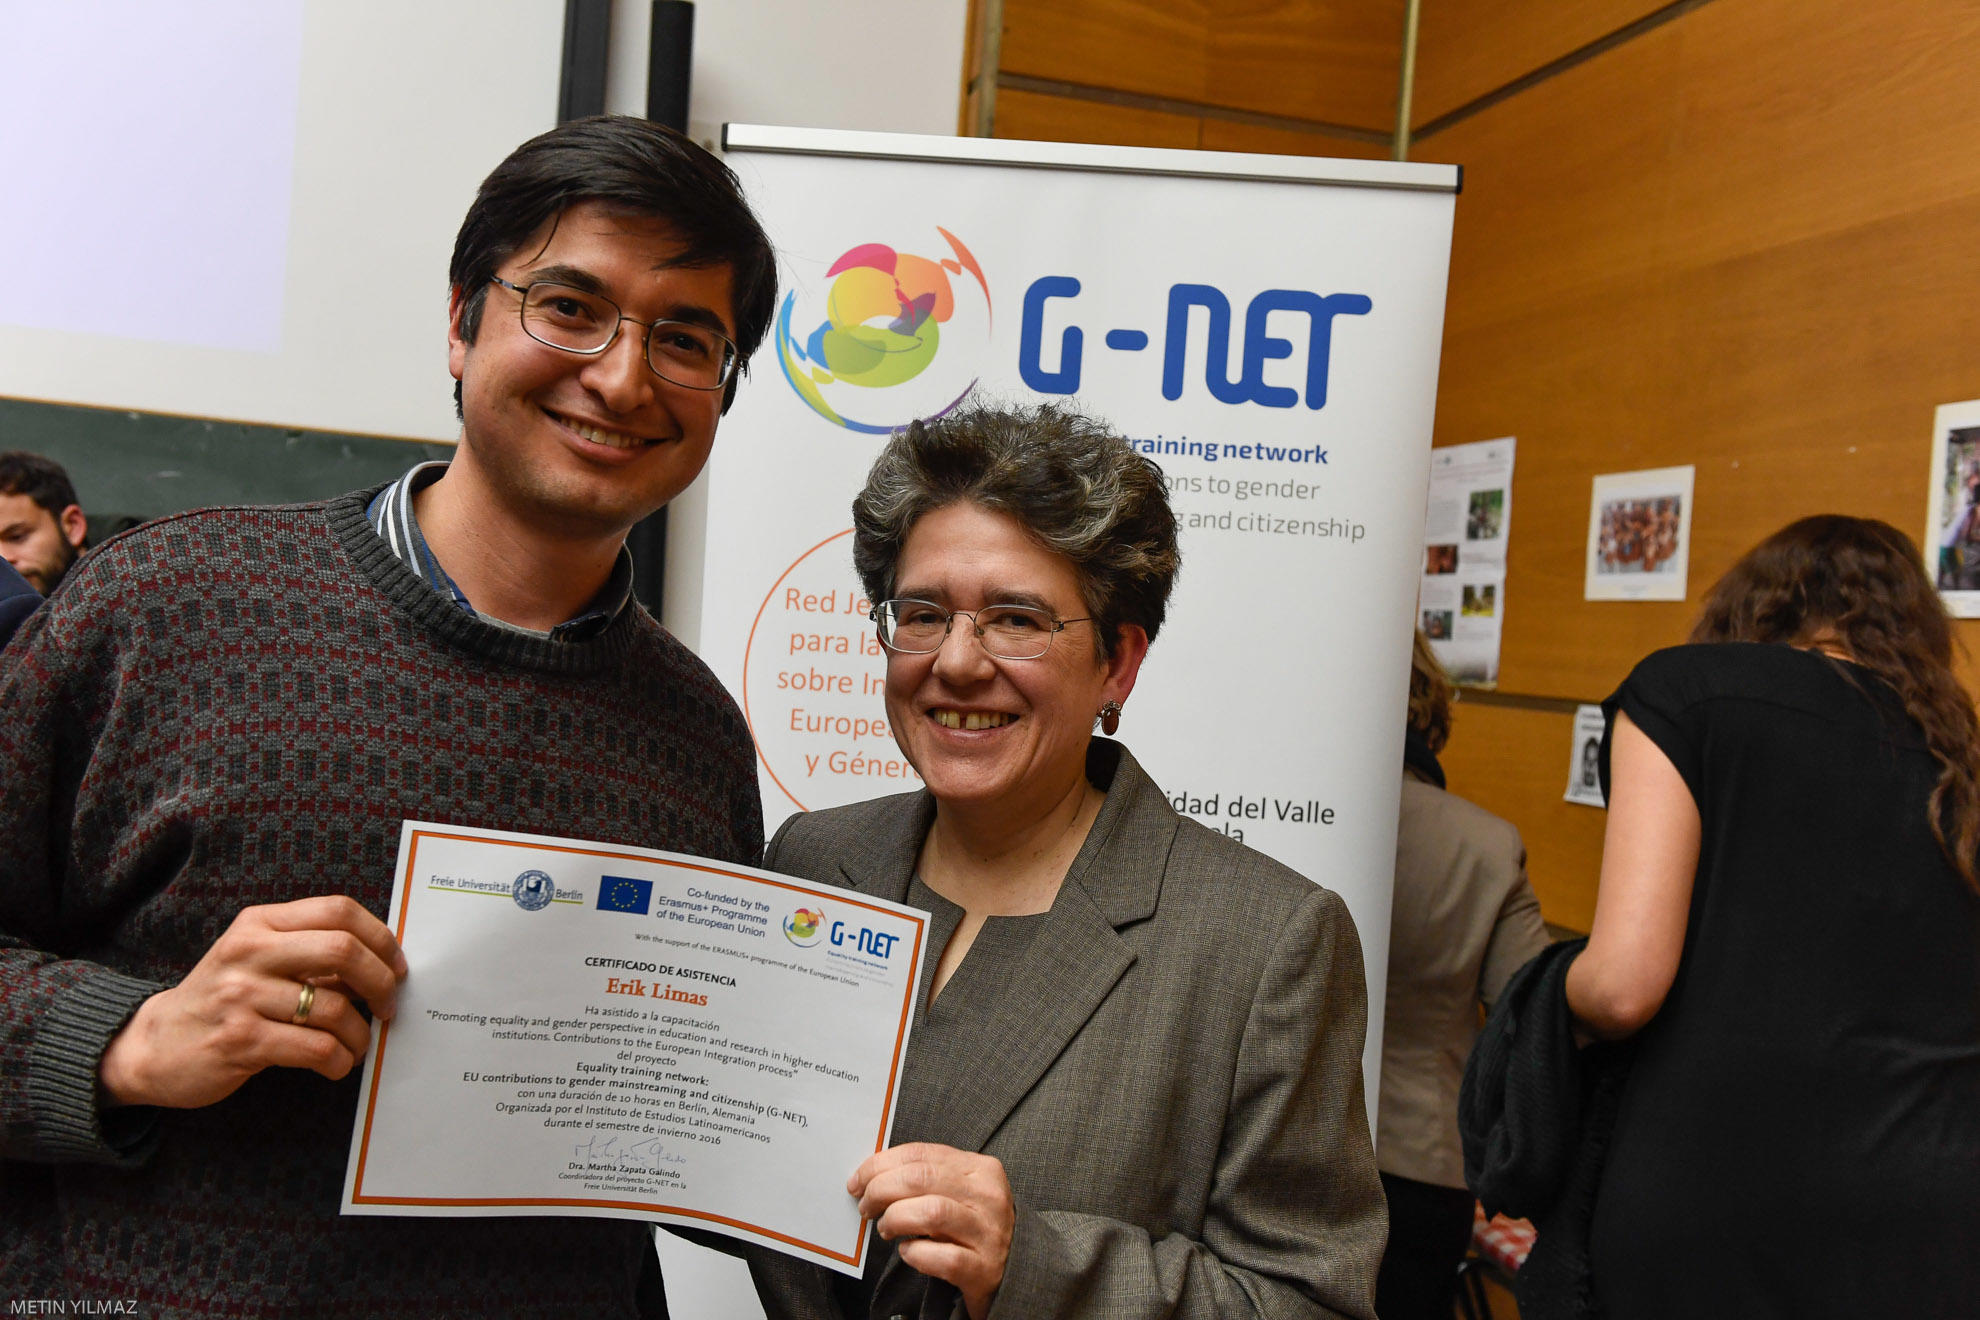 On behalf of the network G-NET Berlin Dr. Martha Zapata Galindo awarded the participants of the workshops.